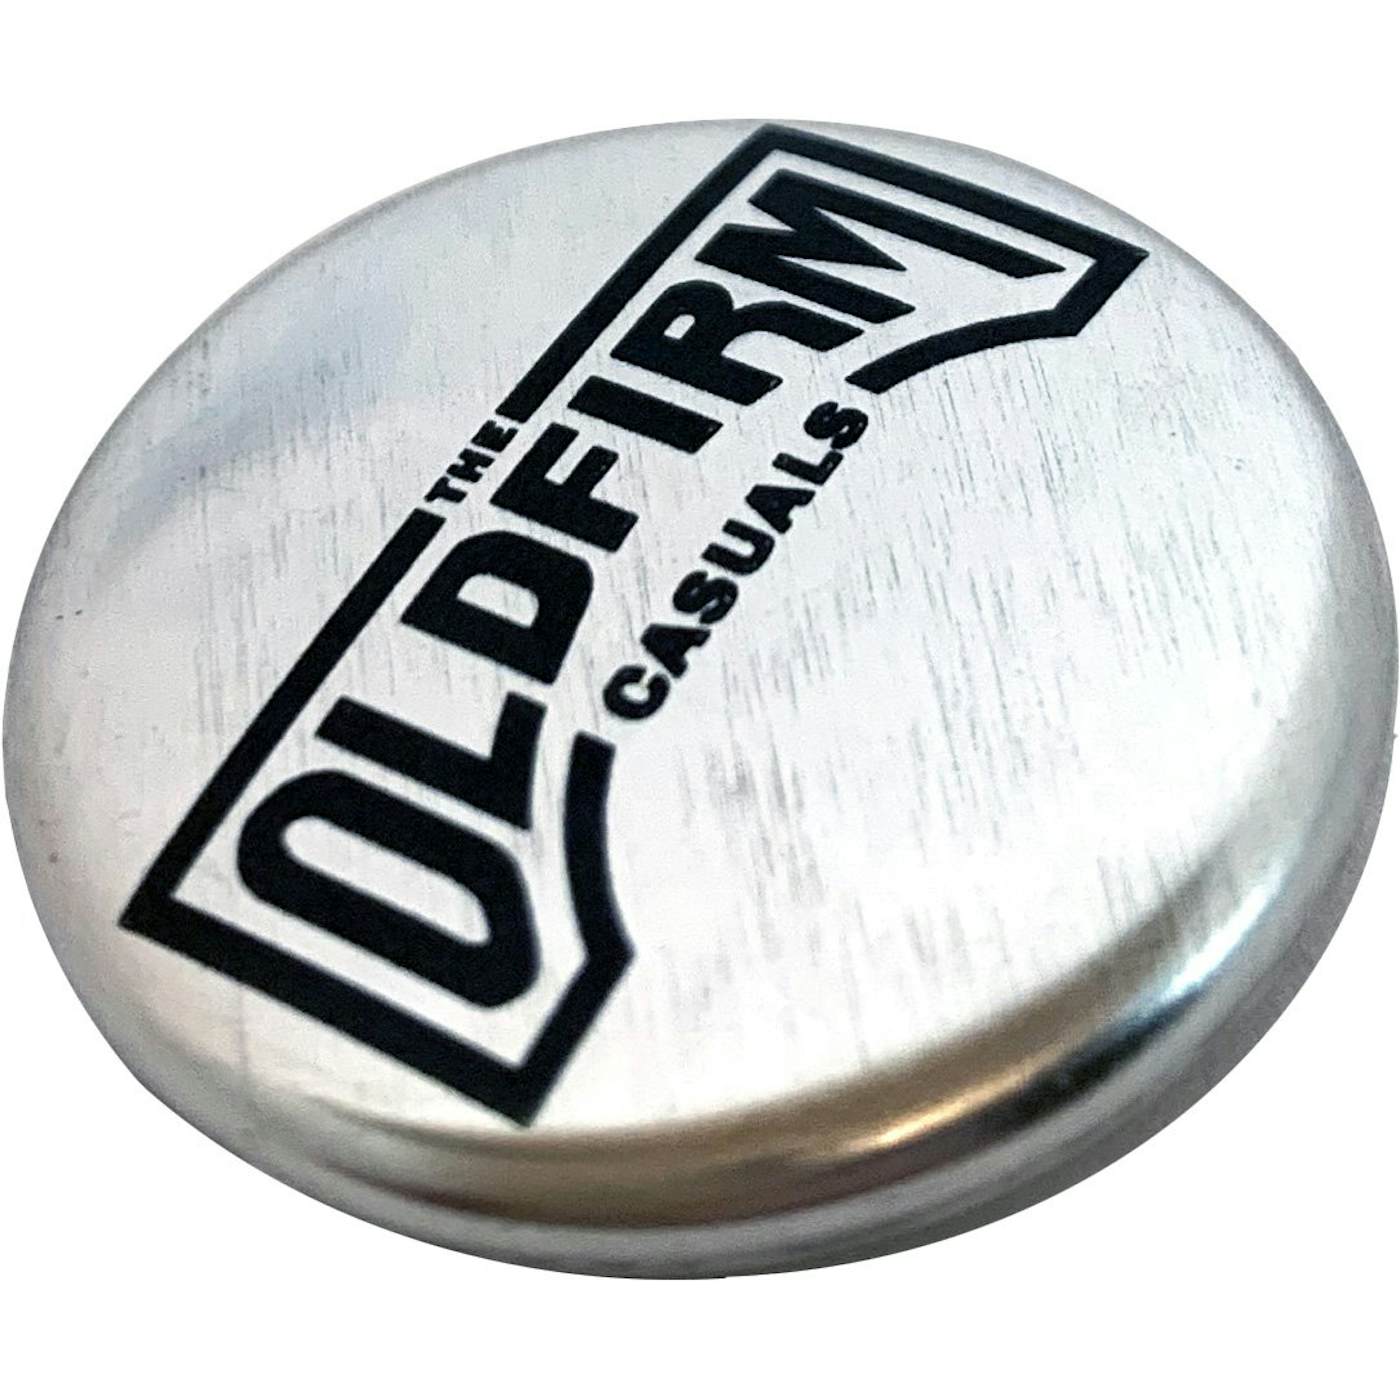 The Old Firm Casuals - Logo - 1'' Button - Black on Silver